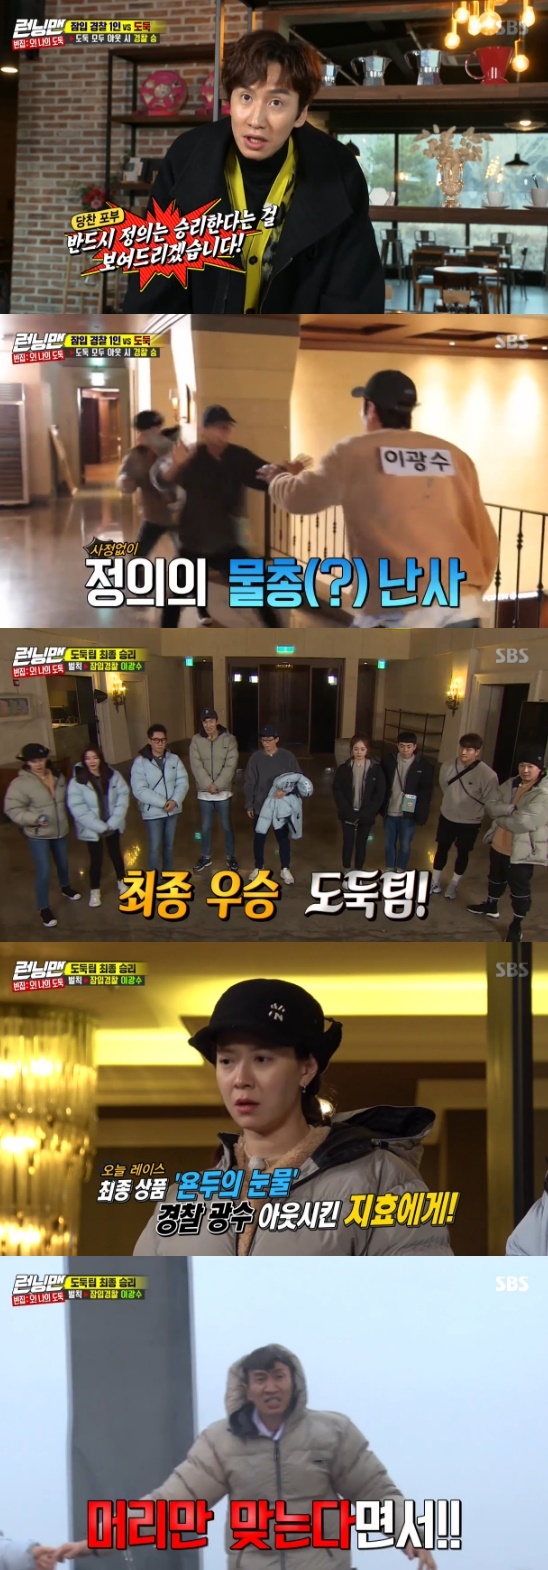 Running Man Lee Kwang-soo ended with a victory for the thieves team as The Mole Song: Undercover Agent Reiji police were identified.On the 2nd SBS Good Sunday - Running Man, Song Ji-hyo took Yondus tears.Park Ha-na appeared as a guest on the day; Park Ha-na showed the EDM dance of a companion parrot, followed by a turbo Black Cat dance alone.Kim Jong-kook, Haha, and Yang Se-chan, who saw this, went on to catch up. The members said, This should not be said to have prepared for the next dance.It is not enough to hit three stars. We finished the edition that Mr. Hana opened. Park Ha-na also parodied the side-sweat incident while performing a trilogy under the name of Jeon So-min; and the situation that members have to settle.Ji Suk-jin laughed, saying, I dont think we can solve it either.Since then, the members have become nine thieves who are looking for the property of the mansion and have played Oh My Thief Race.The Jaeseok team (Yoo Jae-suk, Park Ha-na, Ji Suk-jin), the Final Team (Kim Jong-kook, Jeon So-min, Yang Se-chan), and the Haha Team (Haha, Song Ji-hyo, Lee Kwang-soo) were the Top Model on the mission, respectively, and the strawberry towels I struggled with it all in Game.In particular, Haha said that Song Ji-hyo and Lee Kwang-soo, including himself, continued to be wrong and said, I am honestly embarrassed.The three of them went out and then came in a minute later, acting like they were on a mission for the first time, but they continued to fail, and the members repeatedly came in and out more than four times and laughed.Three teams later arrived at the mansion: Yoo Jae-Suk first untook the secret of the alphabet, and even released other passwords.Then Ji Suk-jin was hit by the In-N-Out Burger for Water Gun.The Water Gun color the thieves received was blue, but the Water Gun color that Ji Suk-jin hit was pink.Kim Jong-kook speculated that unlike Yang Se-chan, Haha was also hit by Water gun and was in-N-Out Burger.Kim Jong-kook, Lee Kwang-soo, suspected Yoo Jae-Suk, referring to the portrait of Yoo Jae-Suk in the mansion.The team first found the safe location: Kim Jong-kook pulled out the file, but Kim Jong-kook was caught by a patrol and was in-N-Out Burger.Then I saw the file that Yoo Jae-Suk fell on, and I found out that there was one police officer, The Mole Song: Undercover Agent Reiji.The remaining ones were Yoo Jae-Suk, Lee Kwang-soo, and Song Ji-hyo, among whom were The Mole Song: Undercover Agent Reiji police.Three people who suspected each other.Yoo Jae-Suk first said that Lee Kwang-soo should be stripped of his bulletproof clothes, and Song Ji-hyo saw Lee Kwang-soo have a pink Water gun.The Mole Song: Undercover Agent Reiji Police were Lee Kwang-soo.However, Lee Kwang-soo was hit by Song Ji-hyos Water Gun, and even received a Water Cannon penalty.Photo = SBS Broadcasting Screen